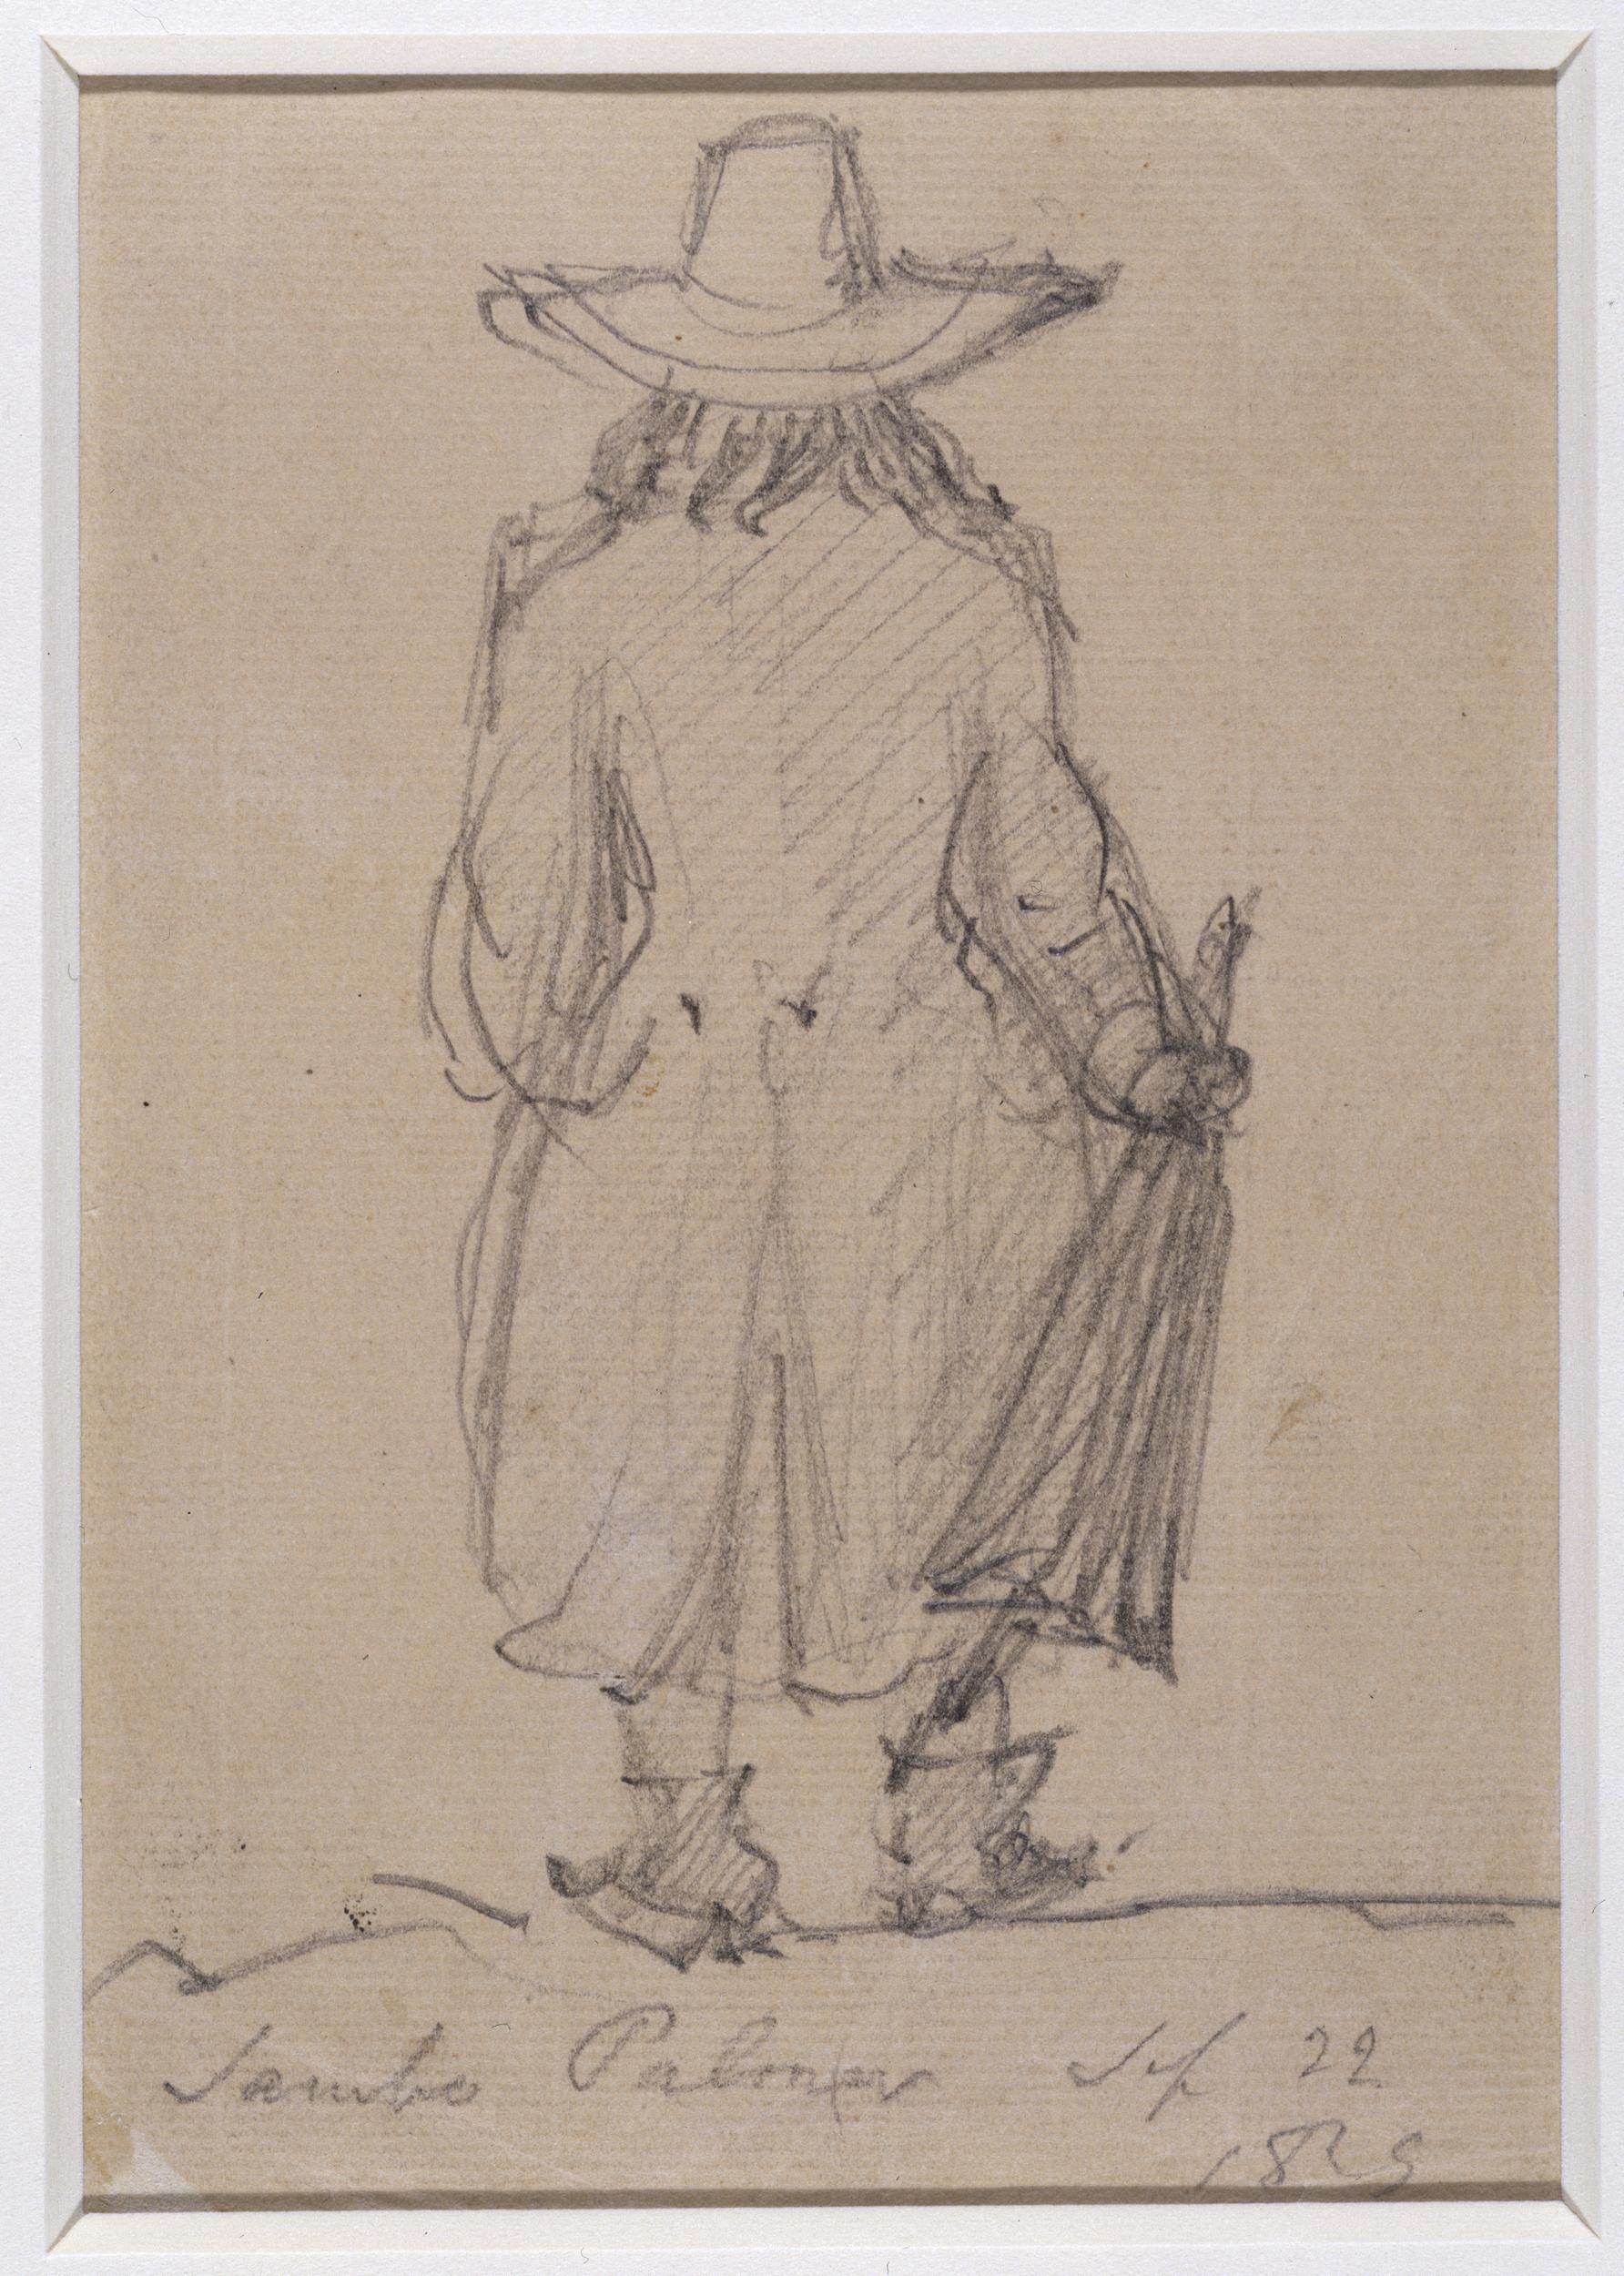 Sketch of the back of a man with hat and holding an upside down umbrella in his right hand